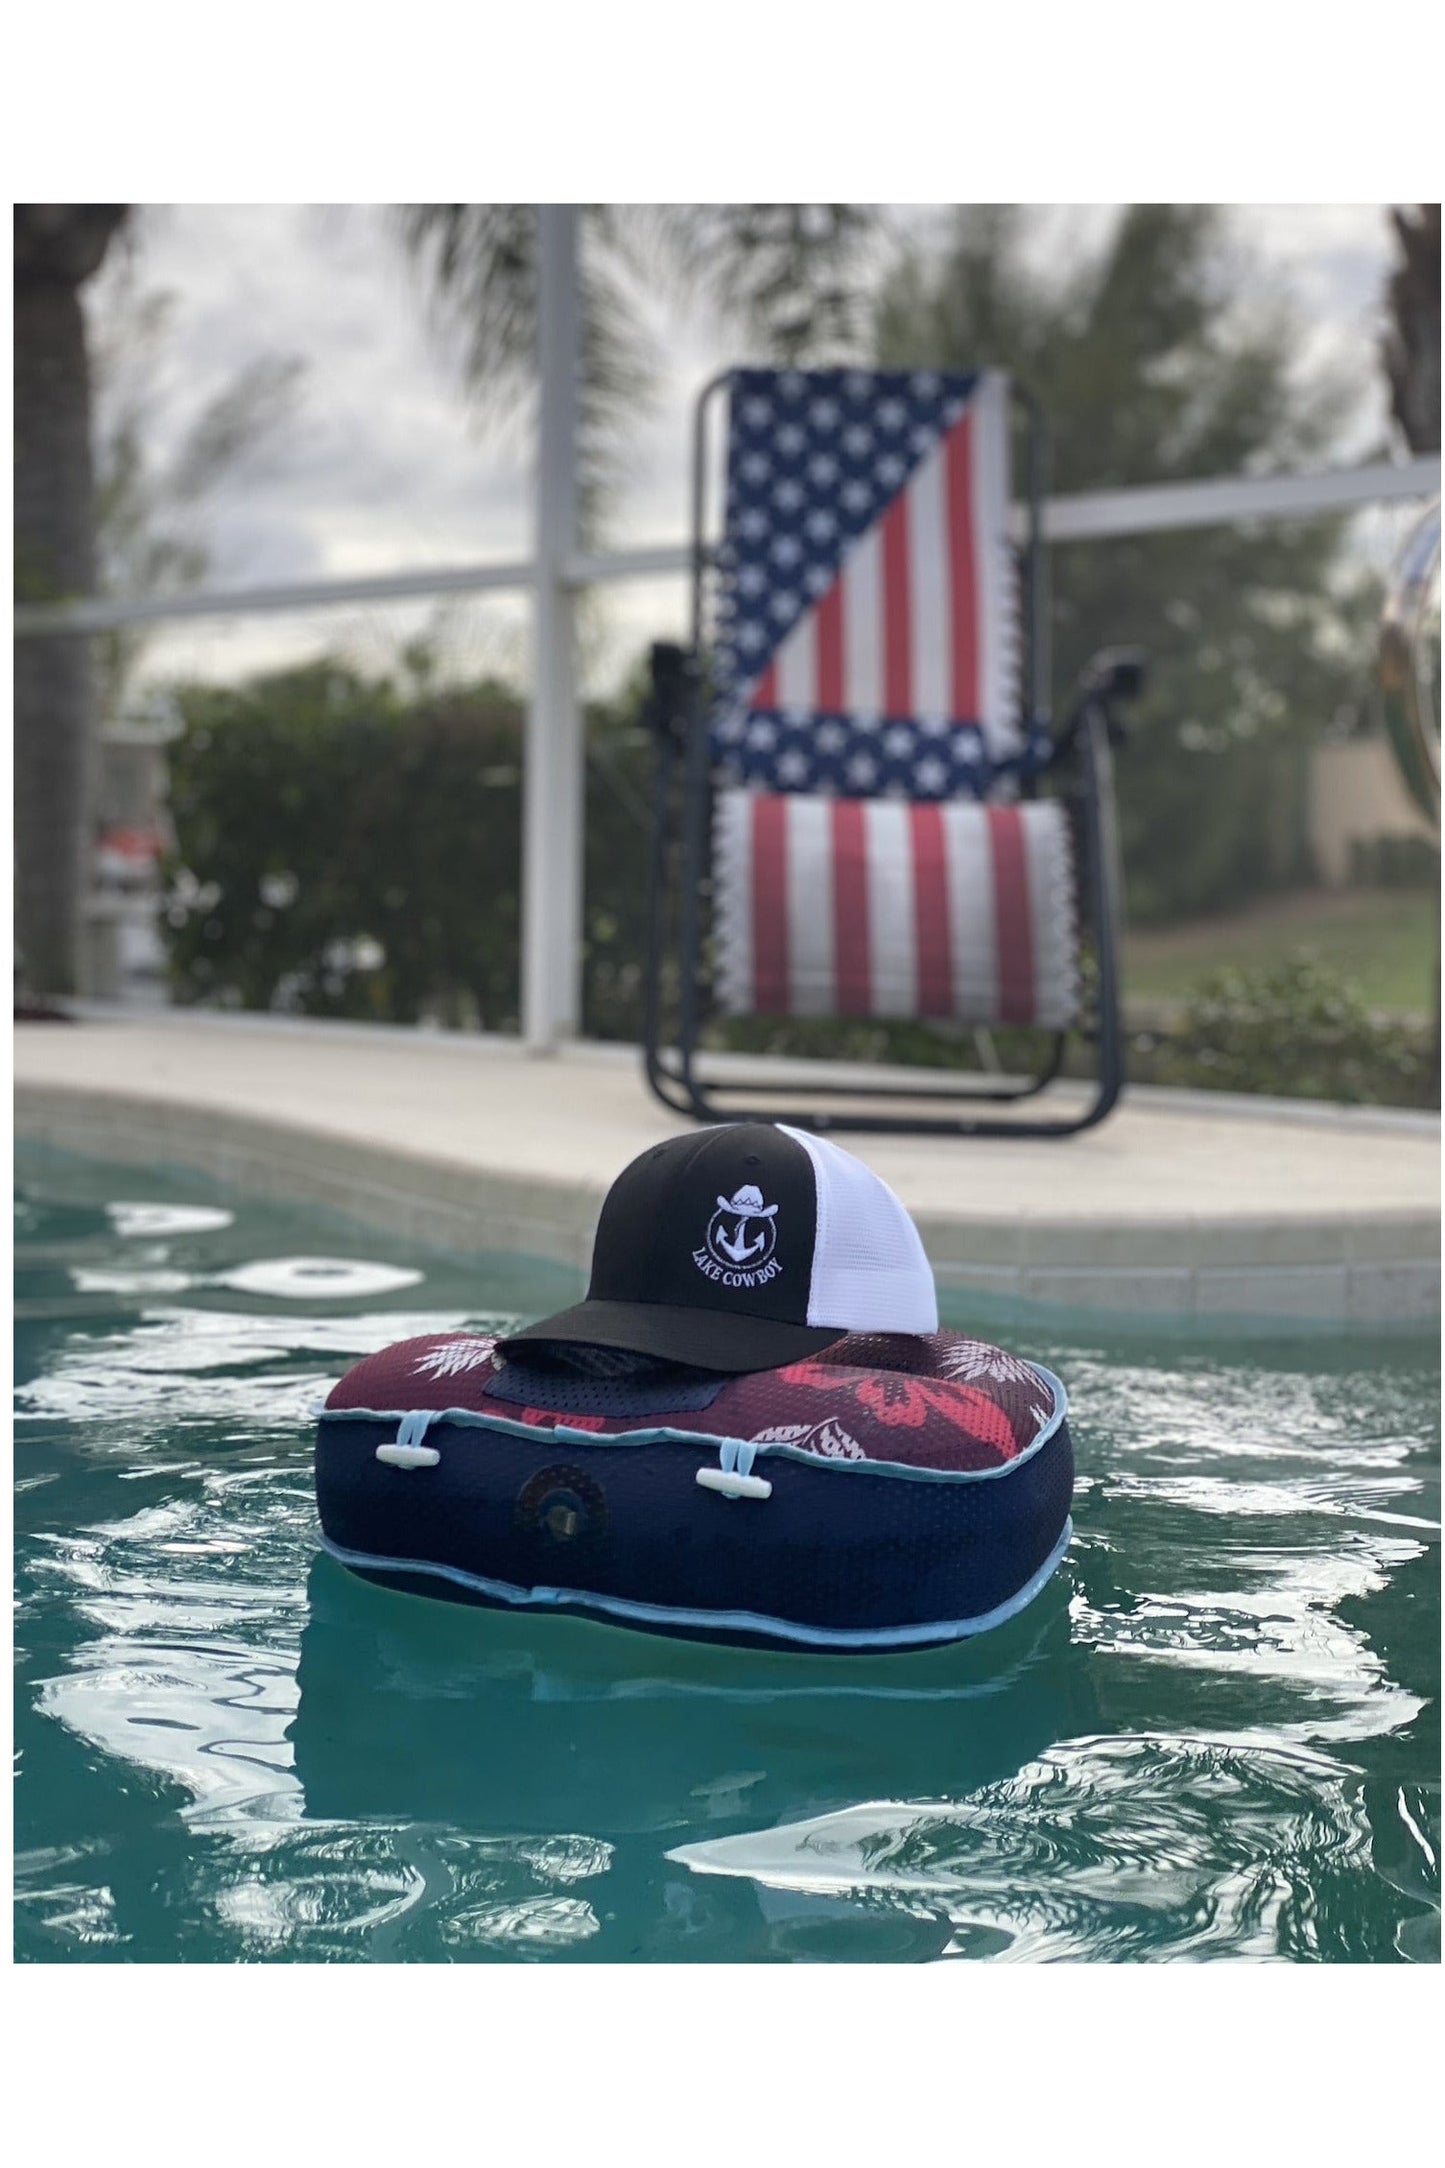 Photo of a Lake Cowboy Baseball Hat (Black & White) floating on a float in a pool in Florida